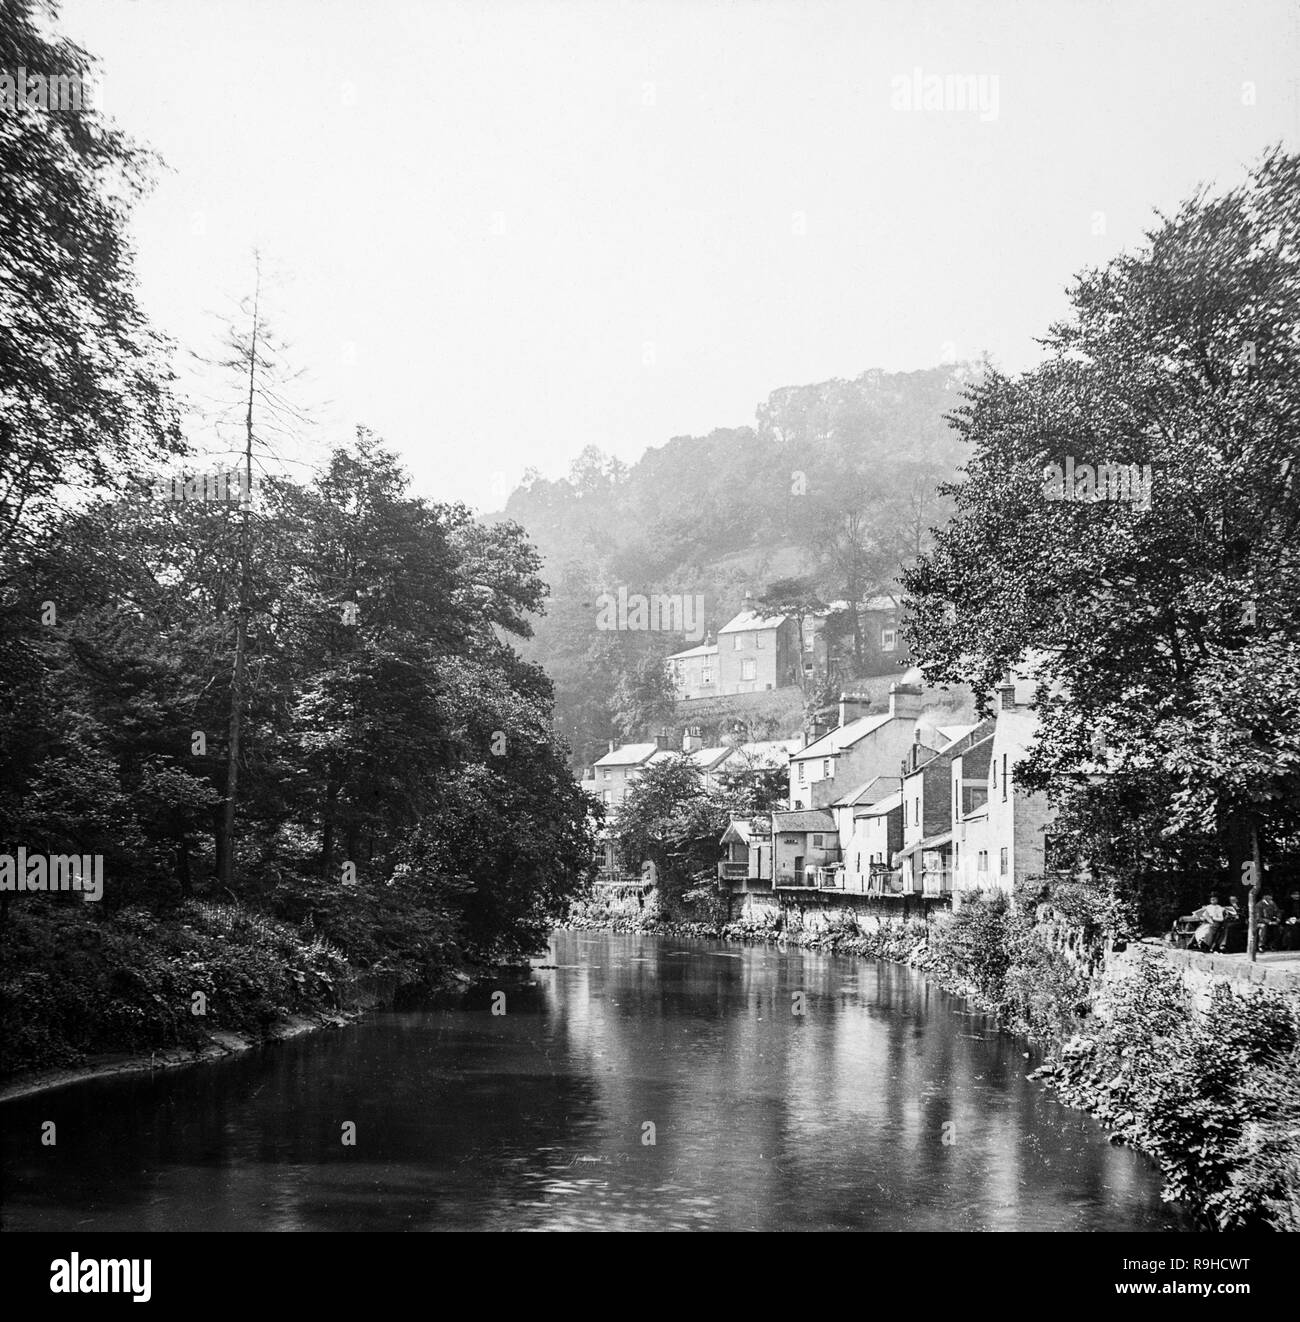 An Edwardian, early twentieth century, vintage  photograph showing the River Derwent and the town of Matlock in Derbyshire, England. Stock Photo